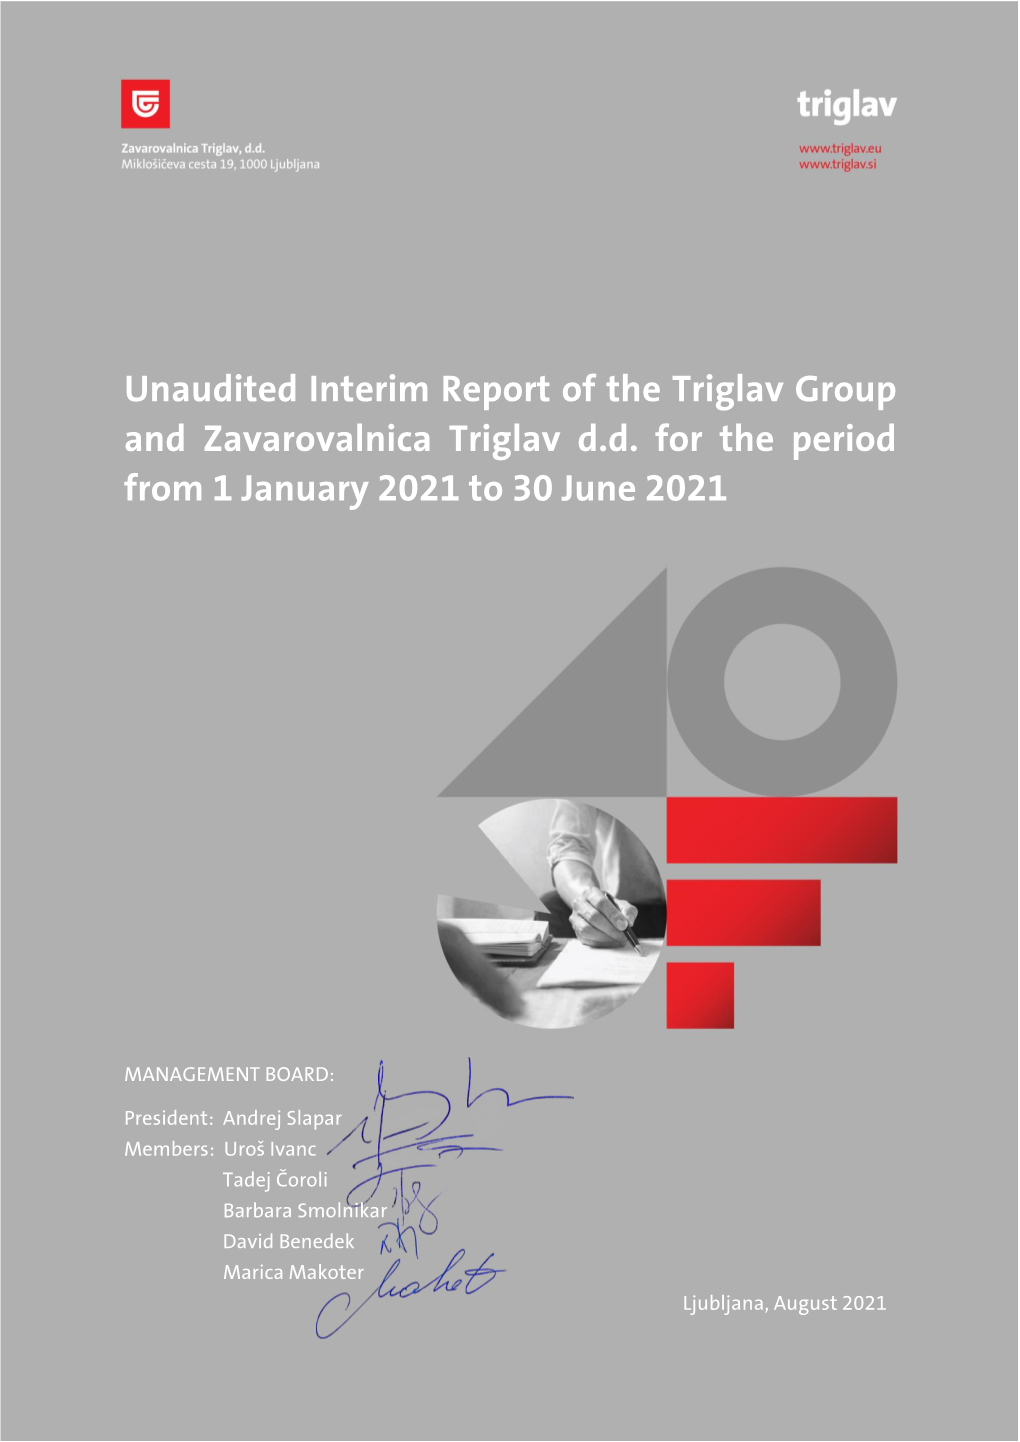 Unaudited Interim Report of the Triglav Group and Zavarovalnica Triglav D.D. for the Period from 1 January 2021 to 30 June 2021